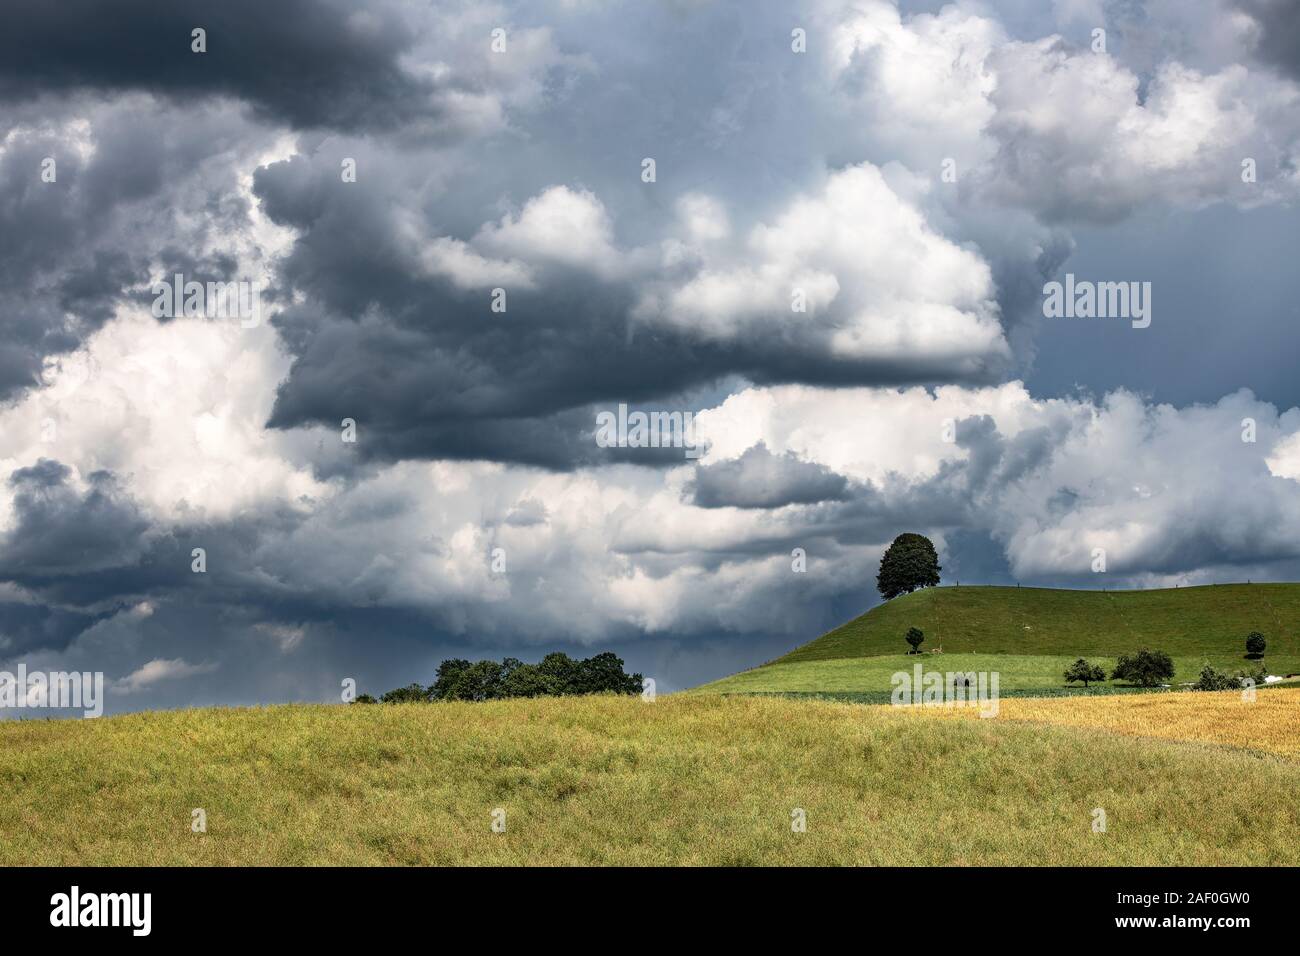 A landscape in the Swiss back country. A gathering summer storm makes the sky dark and and threatening. A linden tree stands on a green dome, a meadow Stock Photo